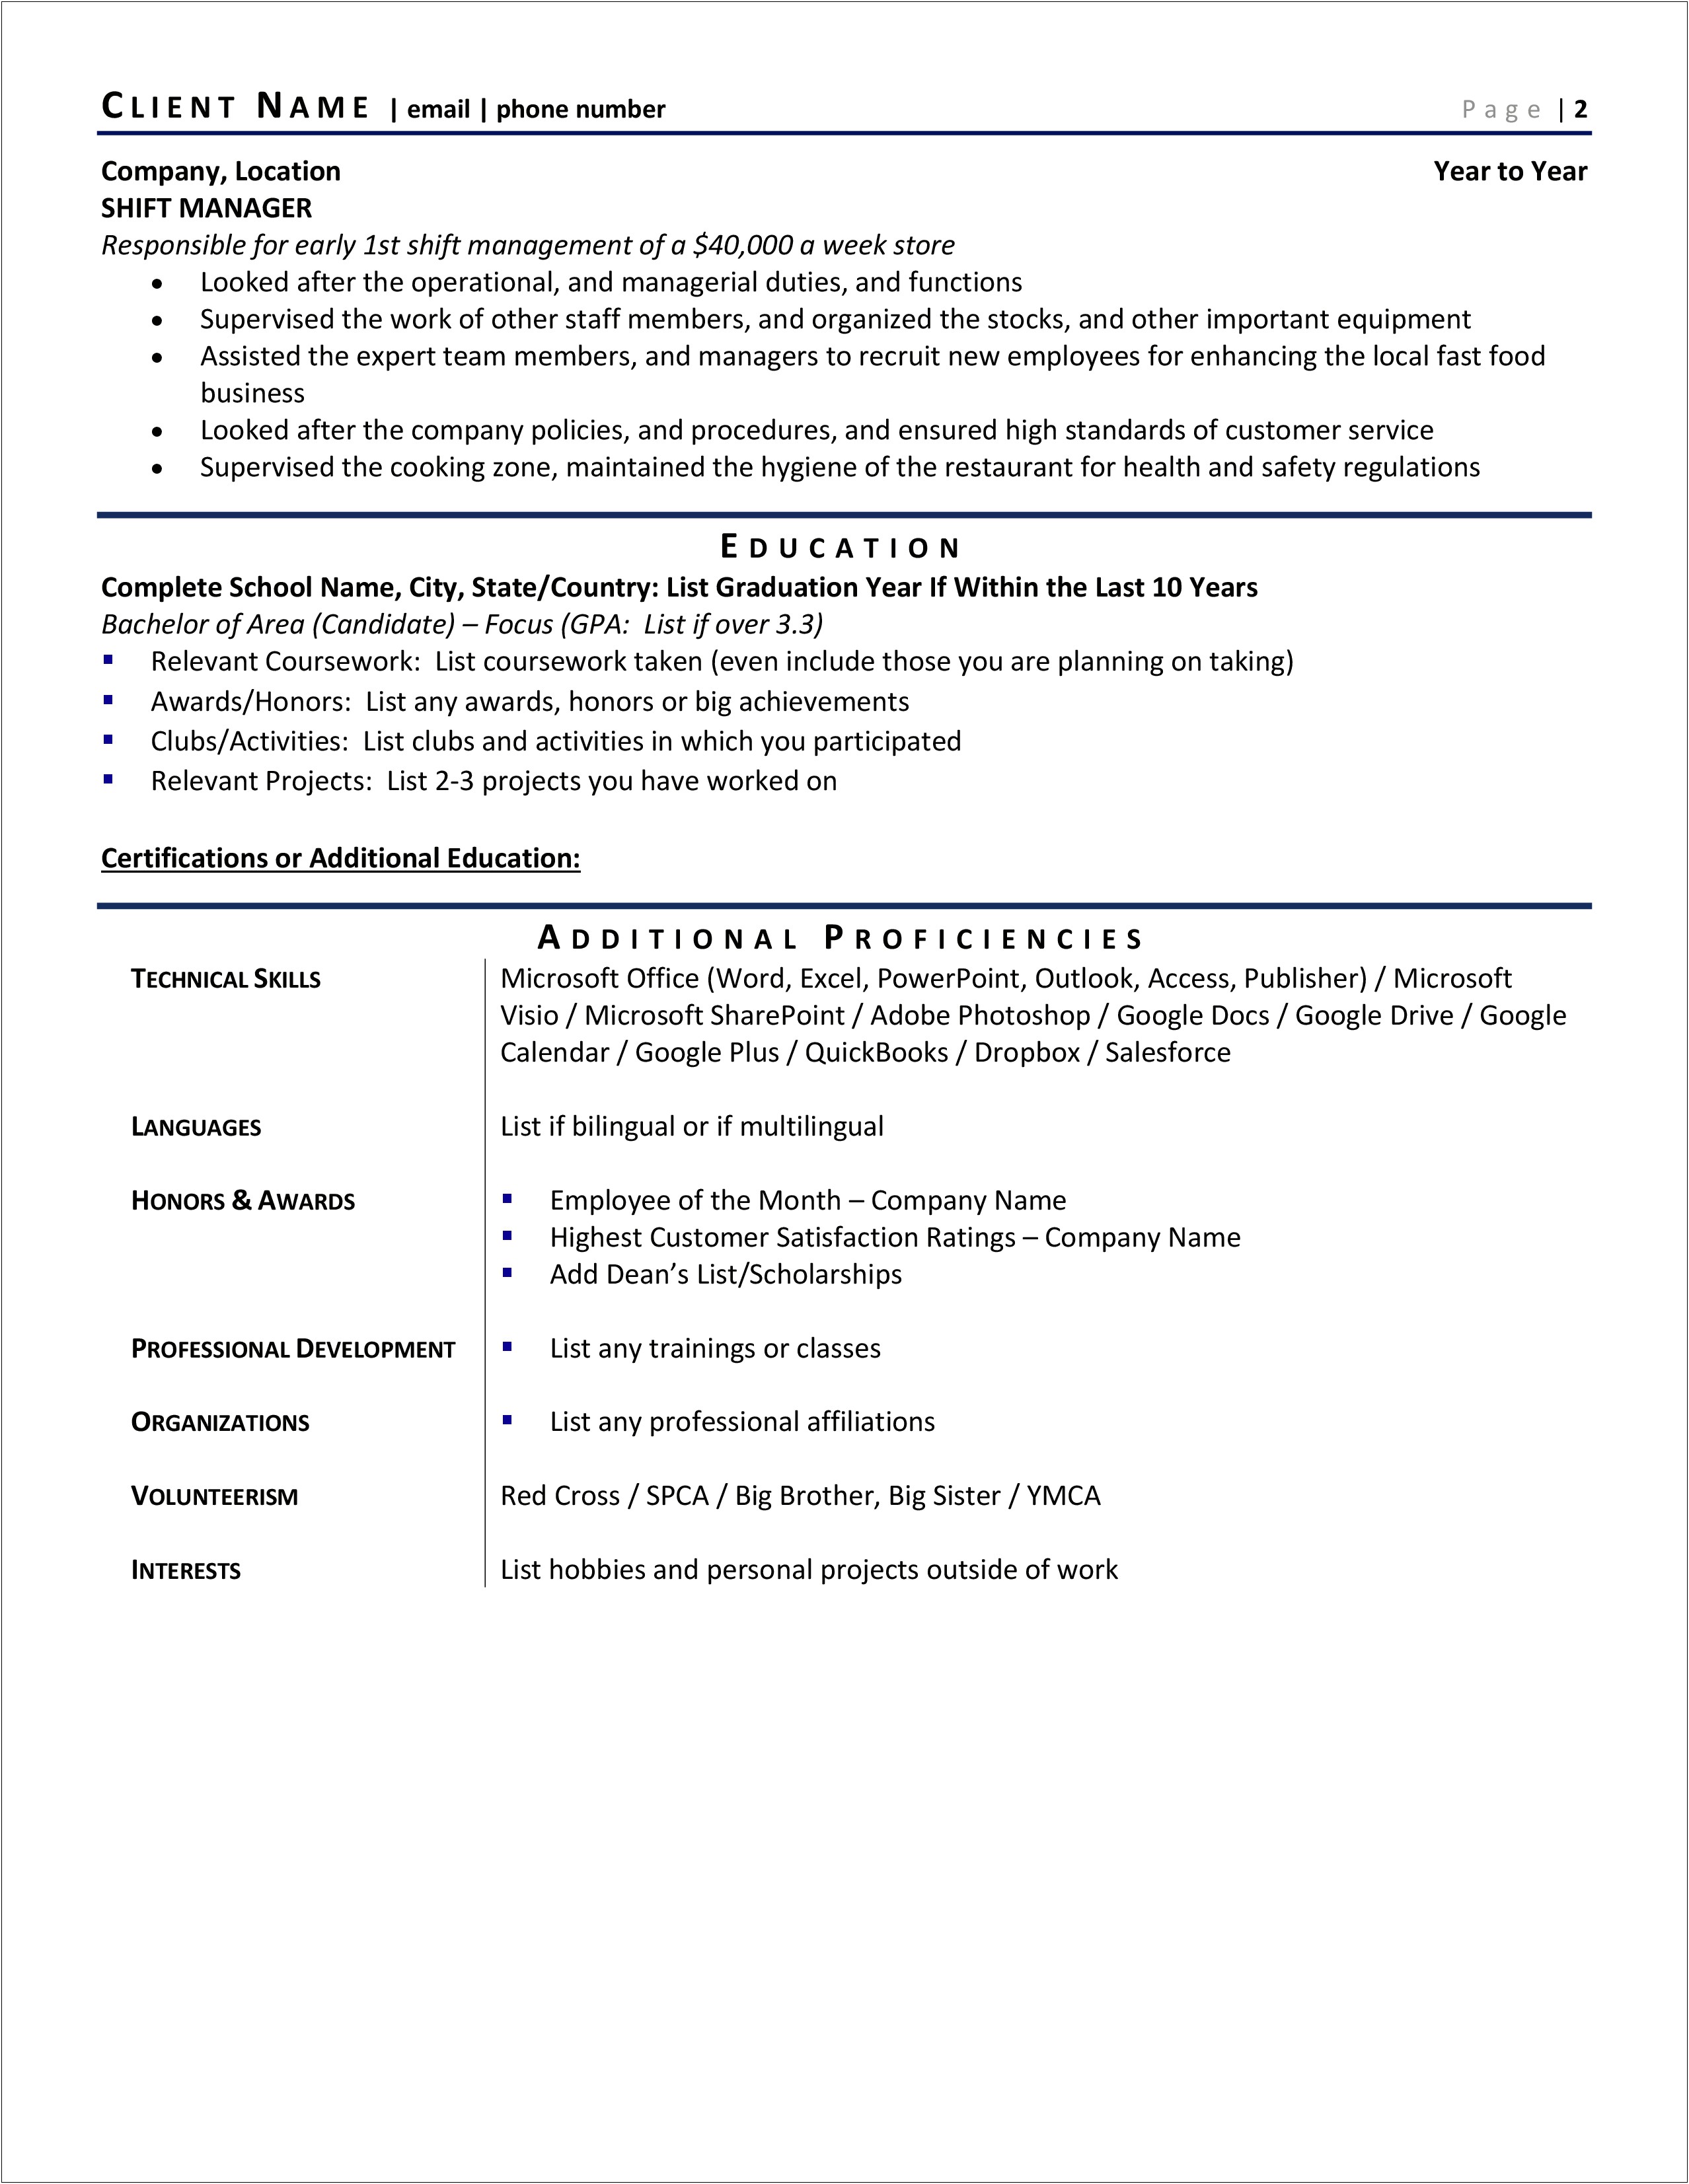 Sample Resume Of Self Employed Person